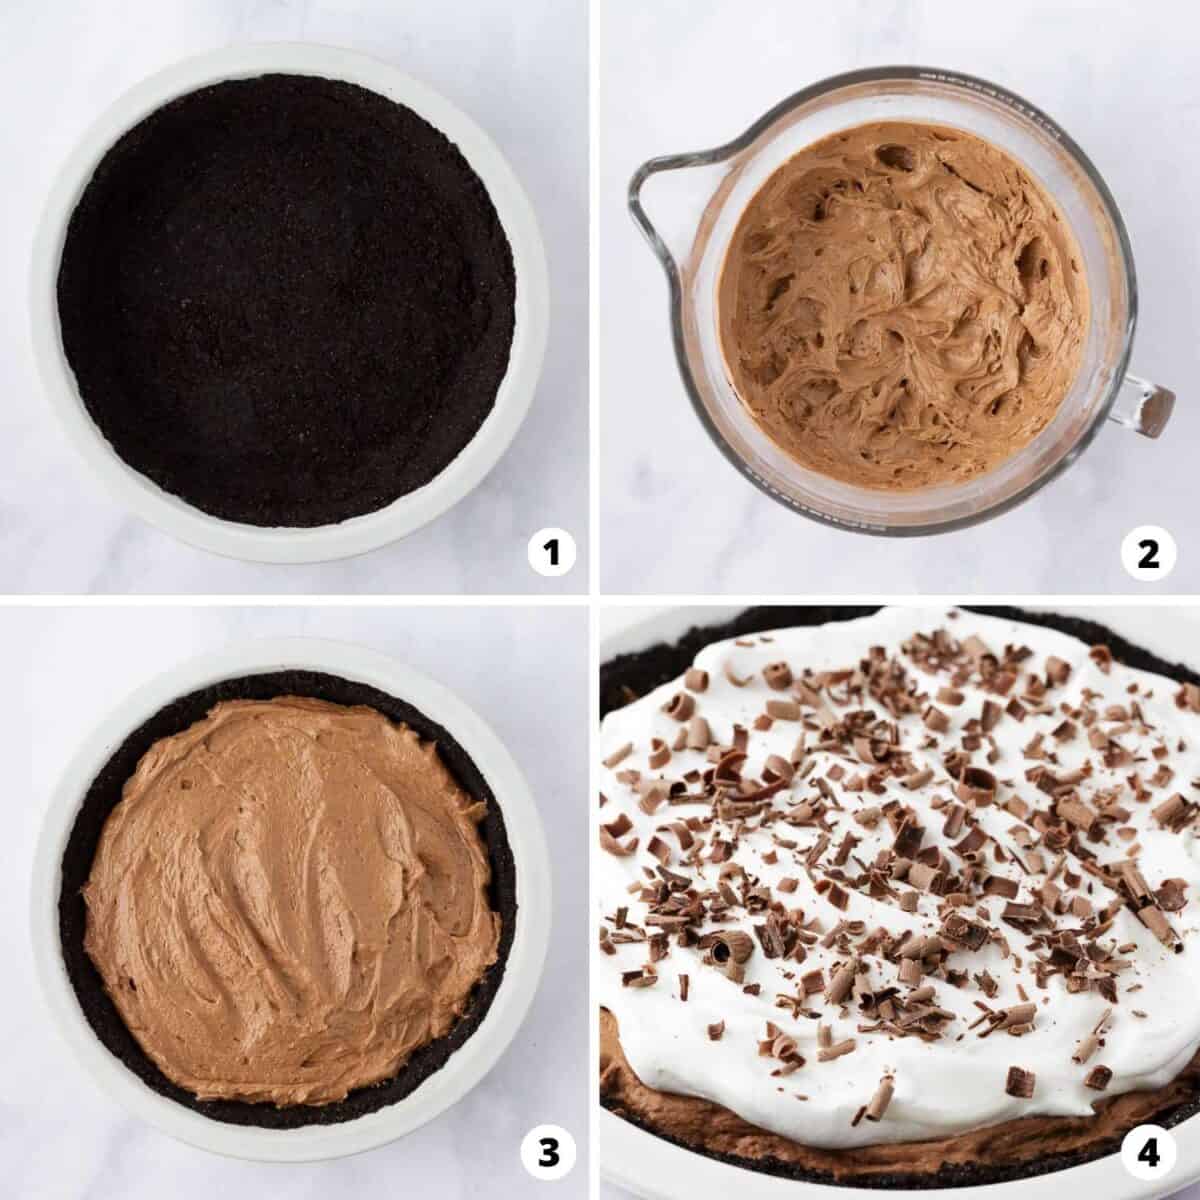 Showing how to make chocolate silk pie in a 4 step collage.